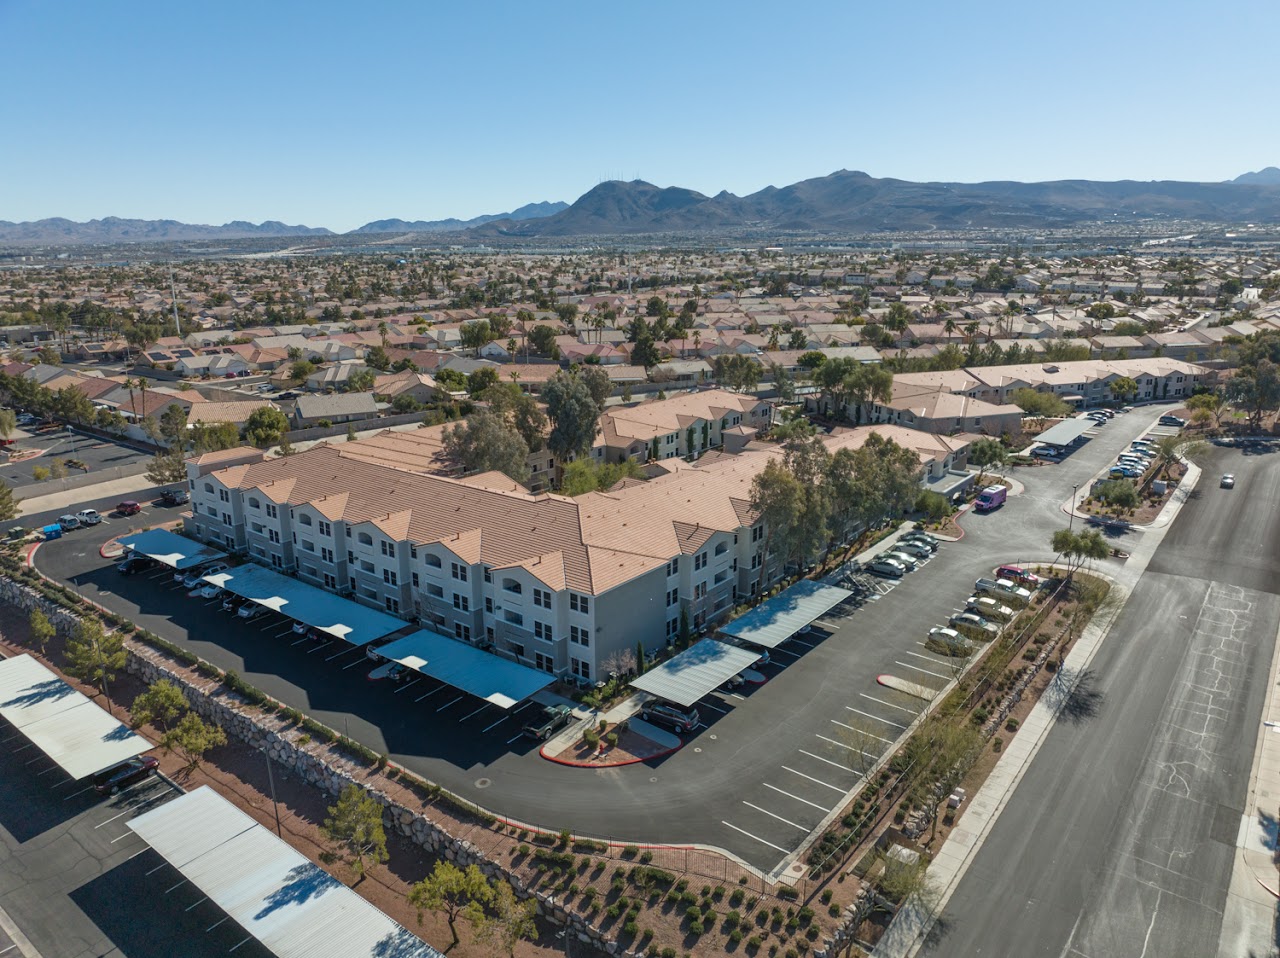 Photo of ANNABELLE PINES II at 320 ANNABELLE LANE HENDERSON, NV 89014